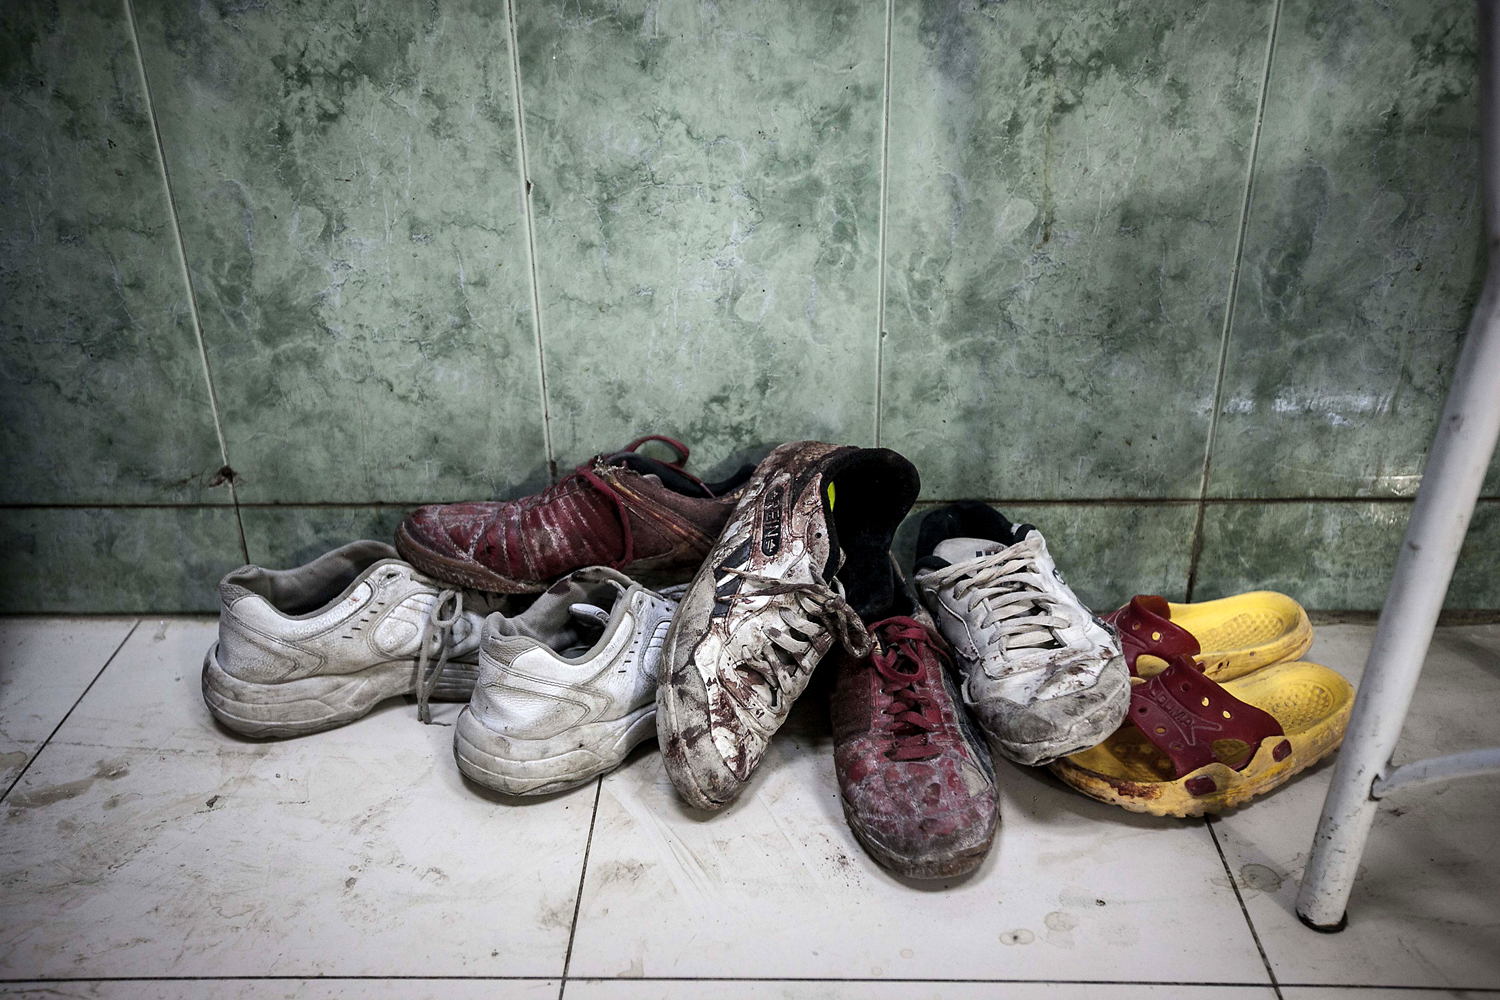 Image: Nov. 1, 2012. A pile of shoes covered by blood from wounded or dead residents lies at the entrance of the emergency ward at a hospital in the Tarik Al-Bab neighborhood in Aleppo, Syria.